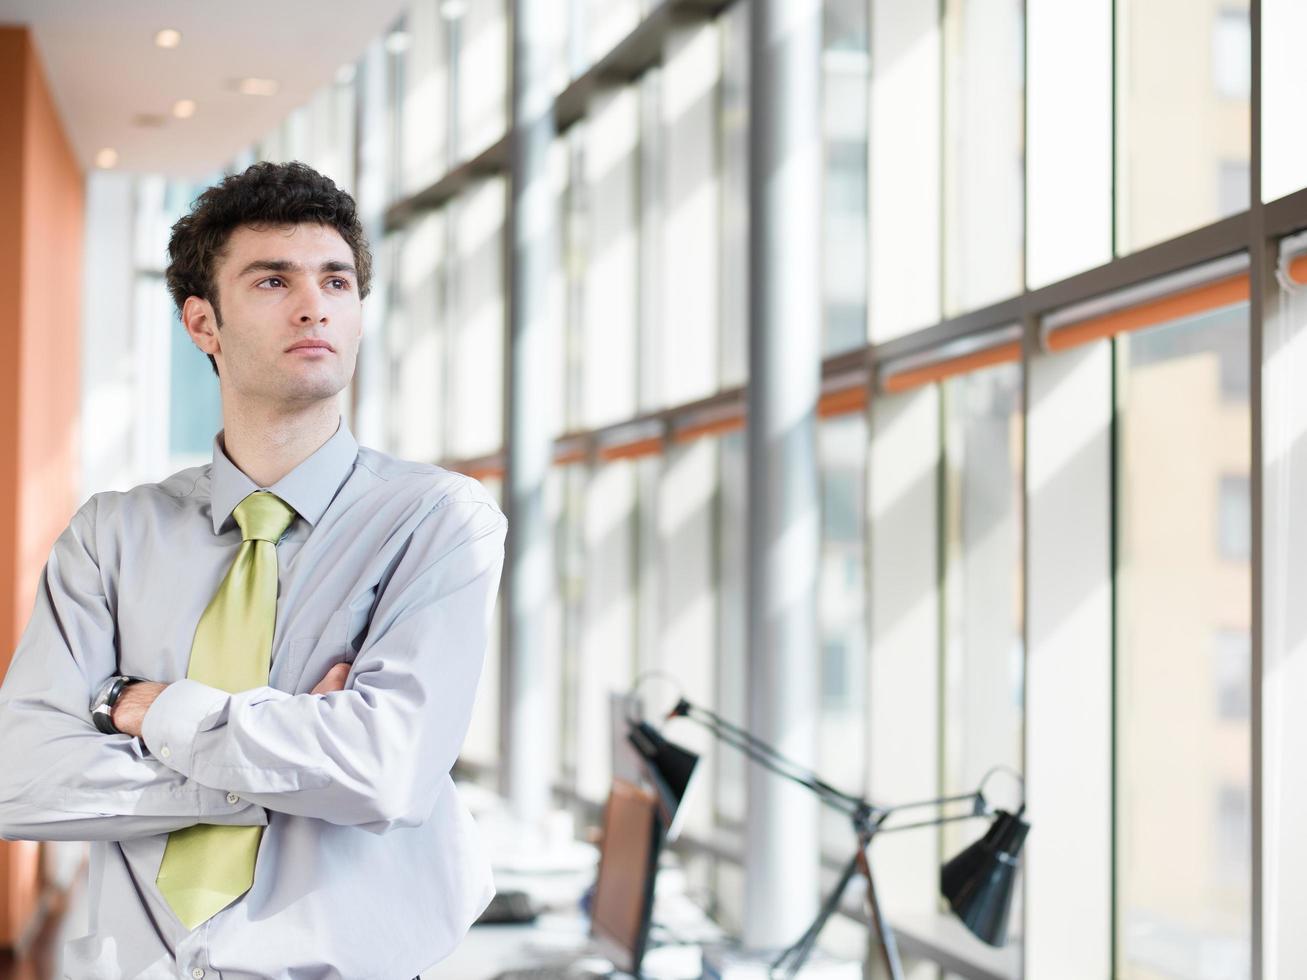 portrait of young business man at modern office photo